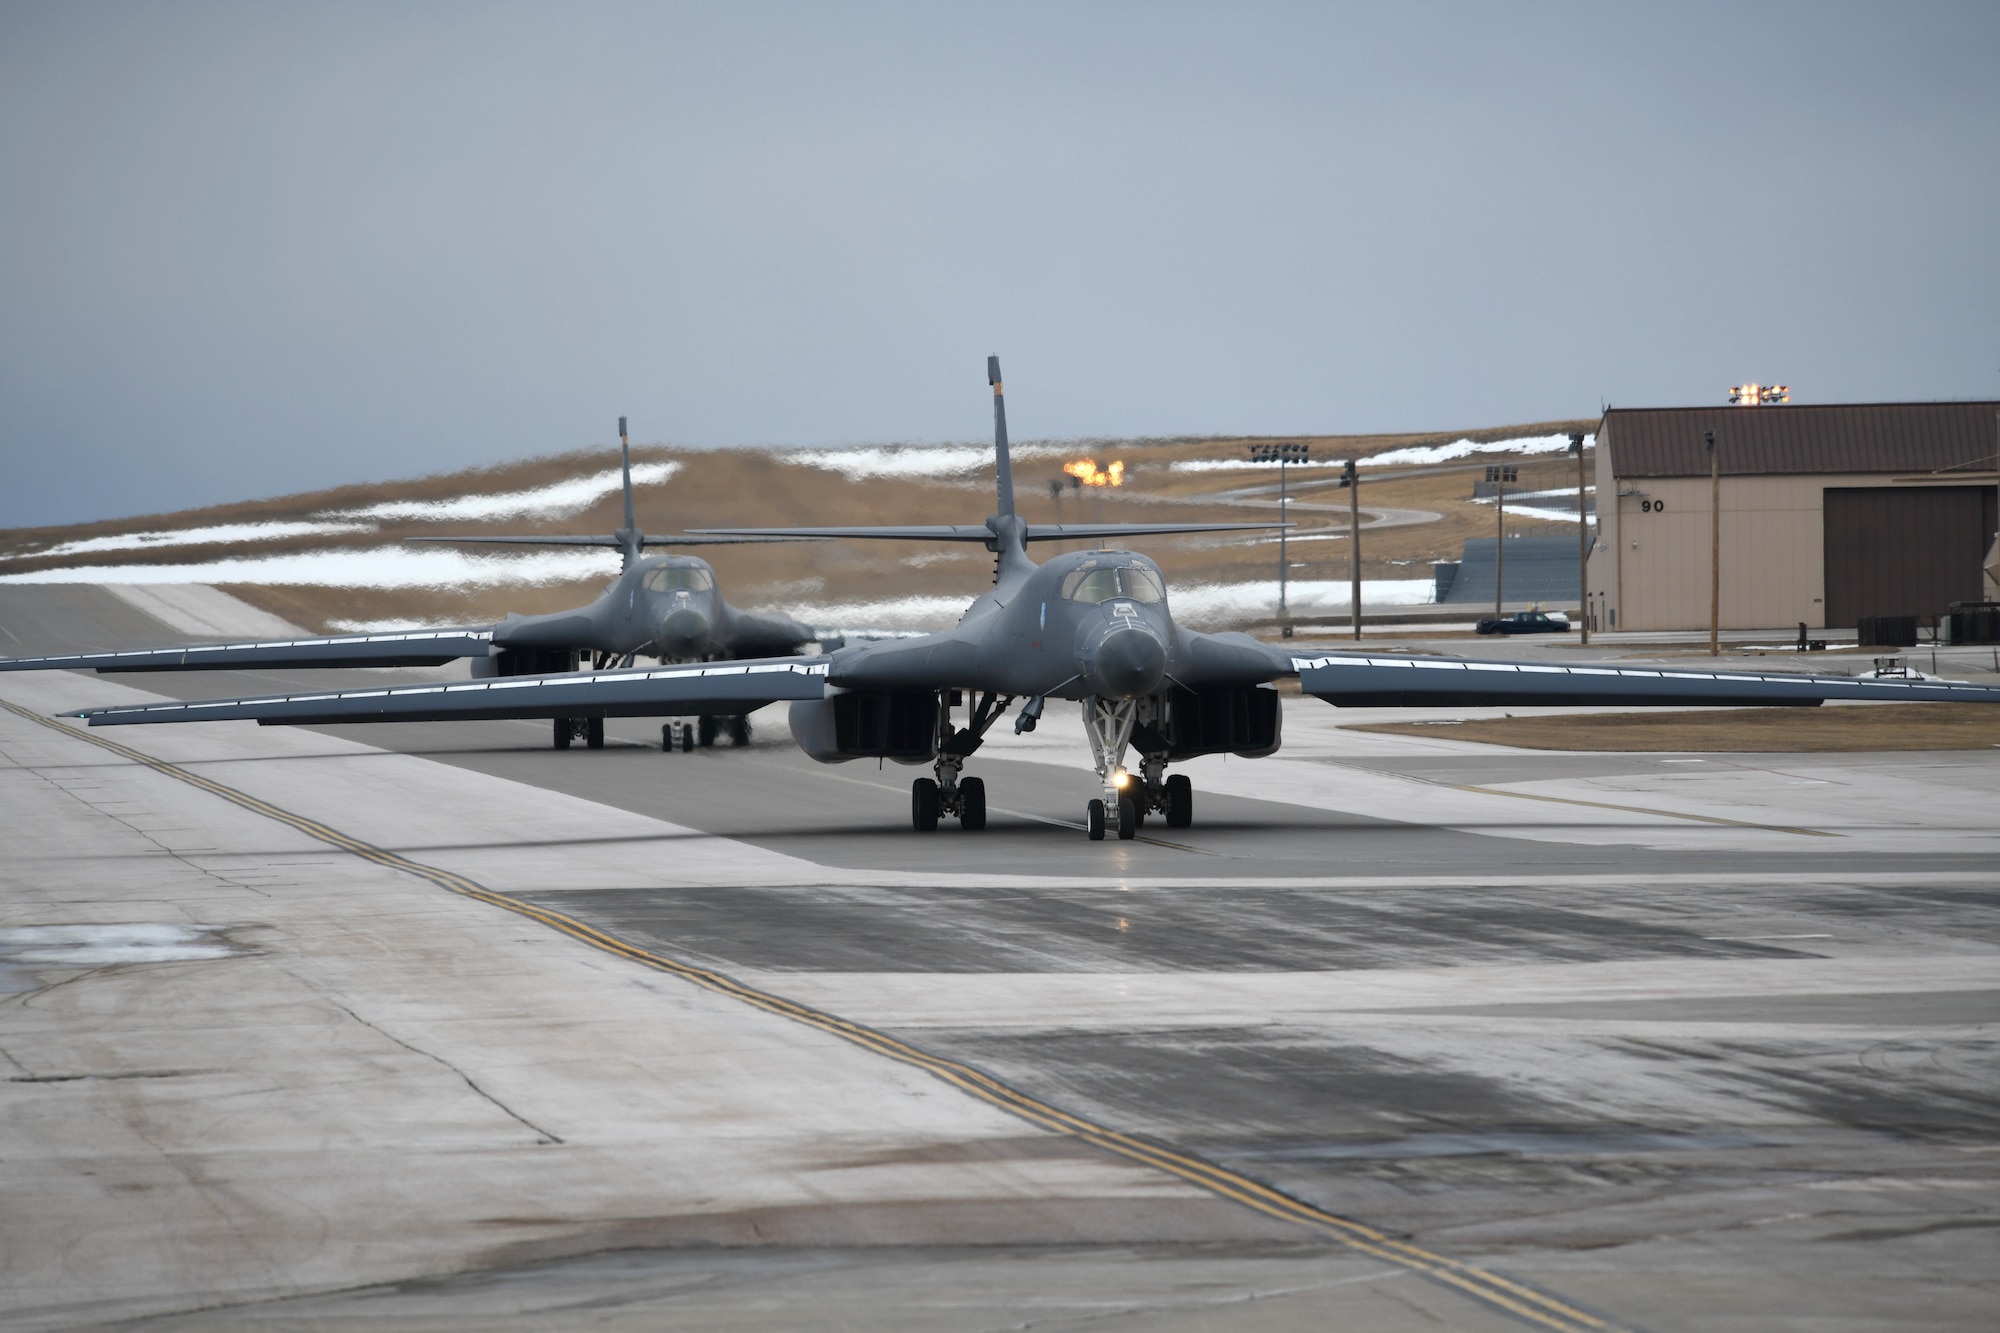 B-1B Lancers assigned to the 28th Bomb Wing at Ellsworth Air Force Base, S.D., leave the parking apron of the flight line, Jan. 22, 2020. Aircrews and B-1s from the 37th Bomb Squadron launched for Red Flag 20-1, a two-week advanced aerial combat training exercise held several times a year by the U.S. Air Force. (U.S. Air Force photo by Staff Sgt. Hailey Staker)